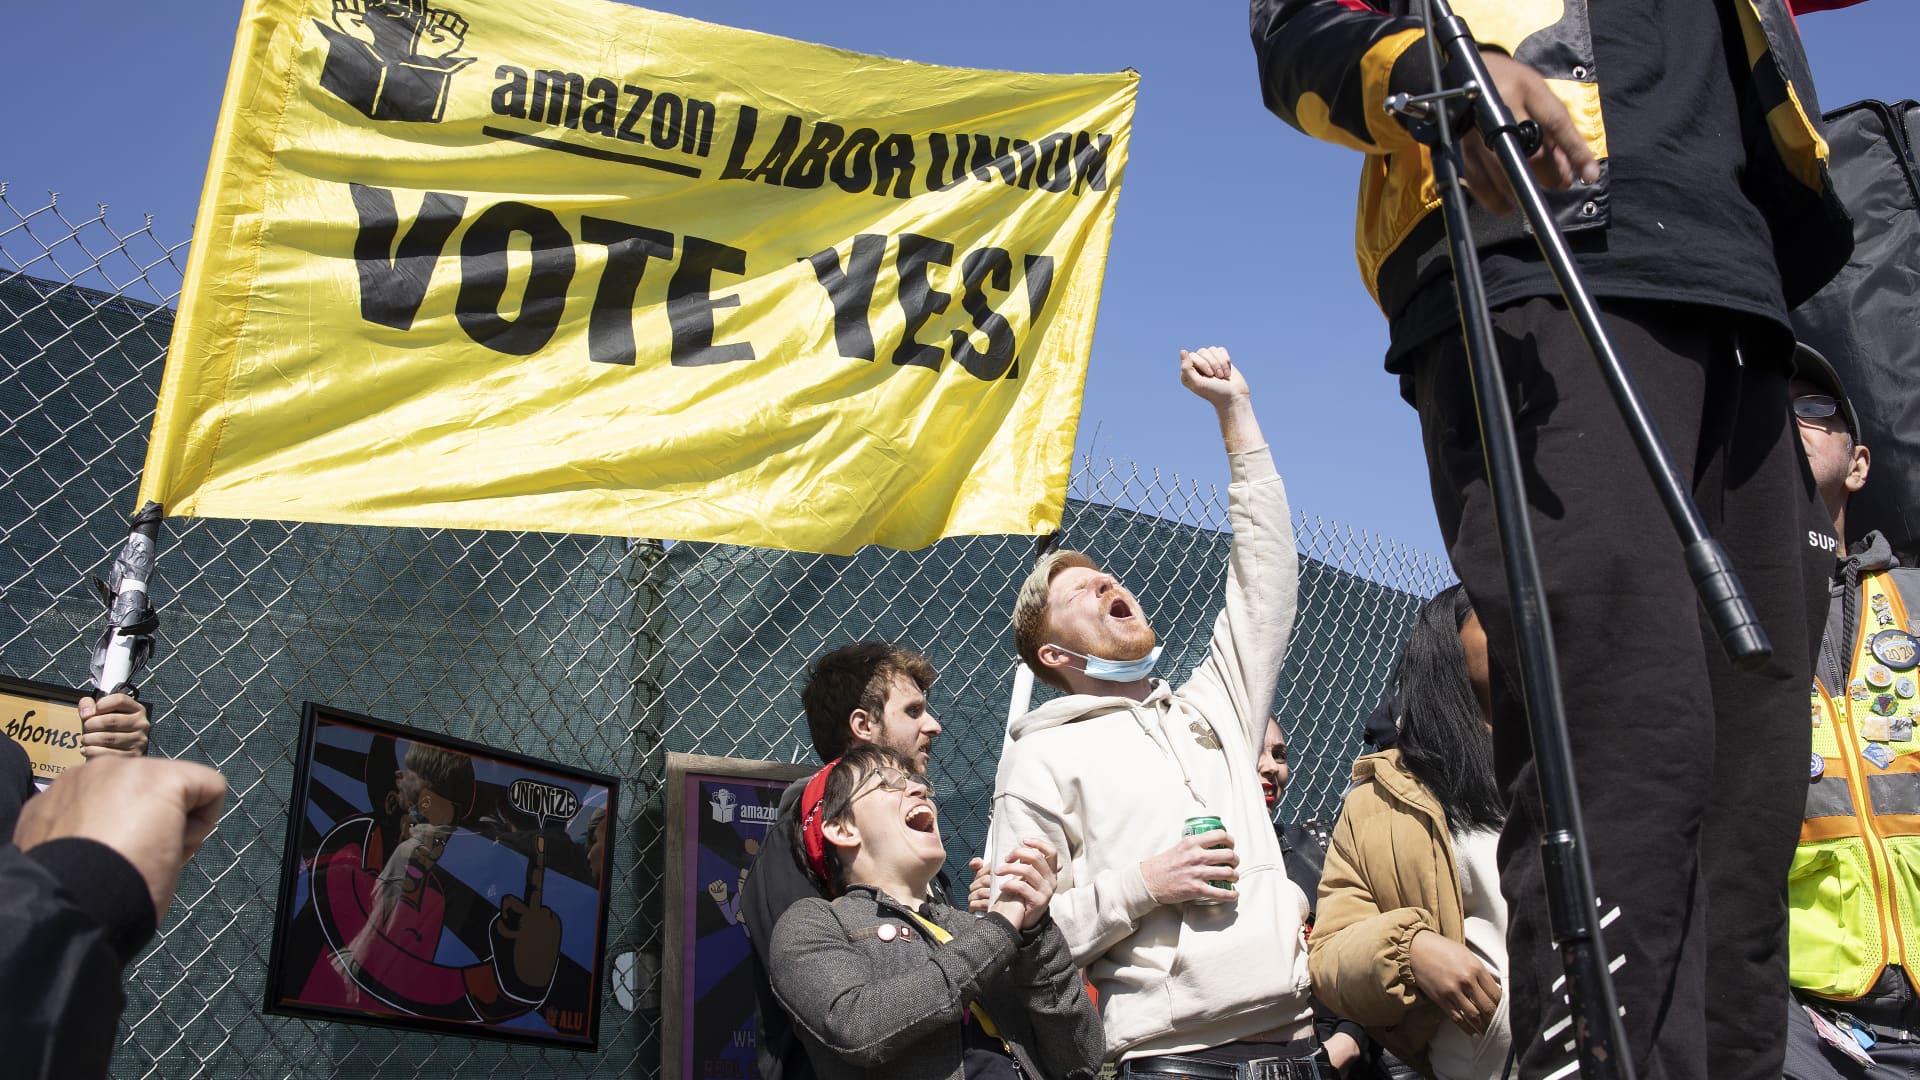 Amazon workers at the LDJ5 Amazon warehouse rally in support of the union on April 24, 2022 in Staten Island, New York. The union vote at LDJ5 was defeated on May 2, 2022.